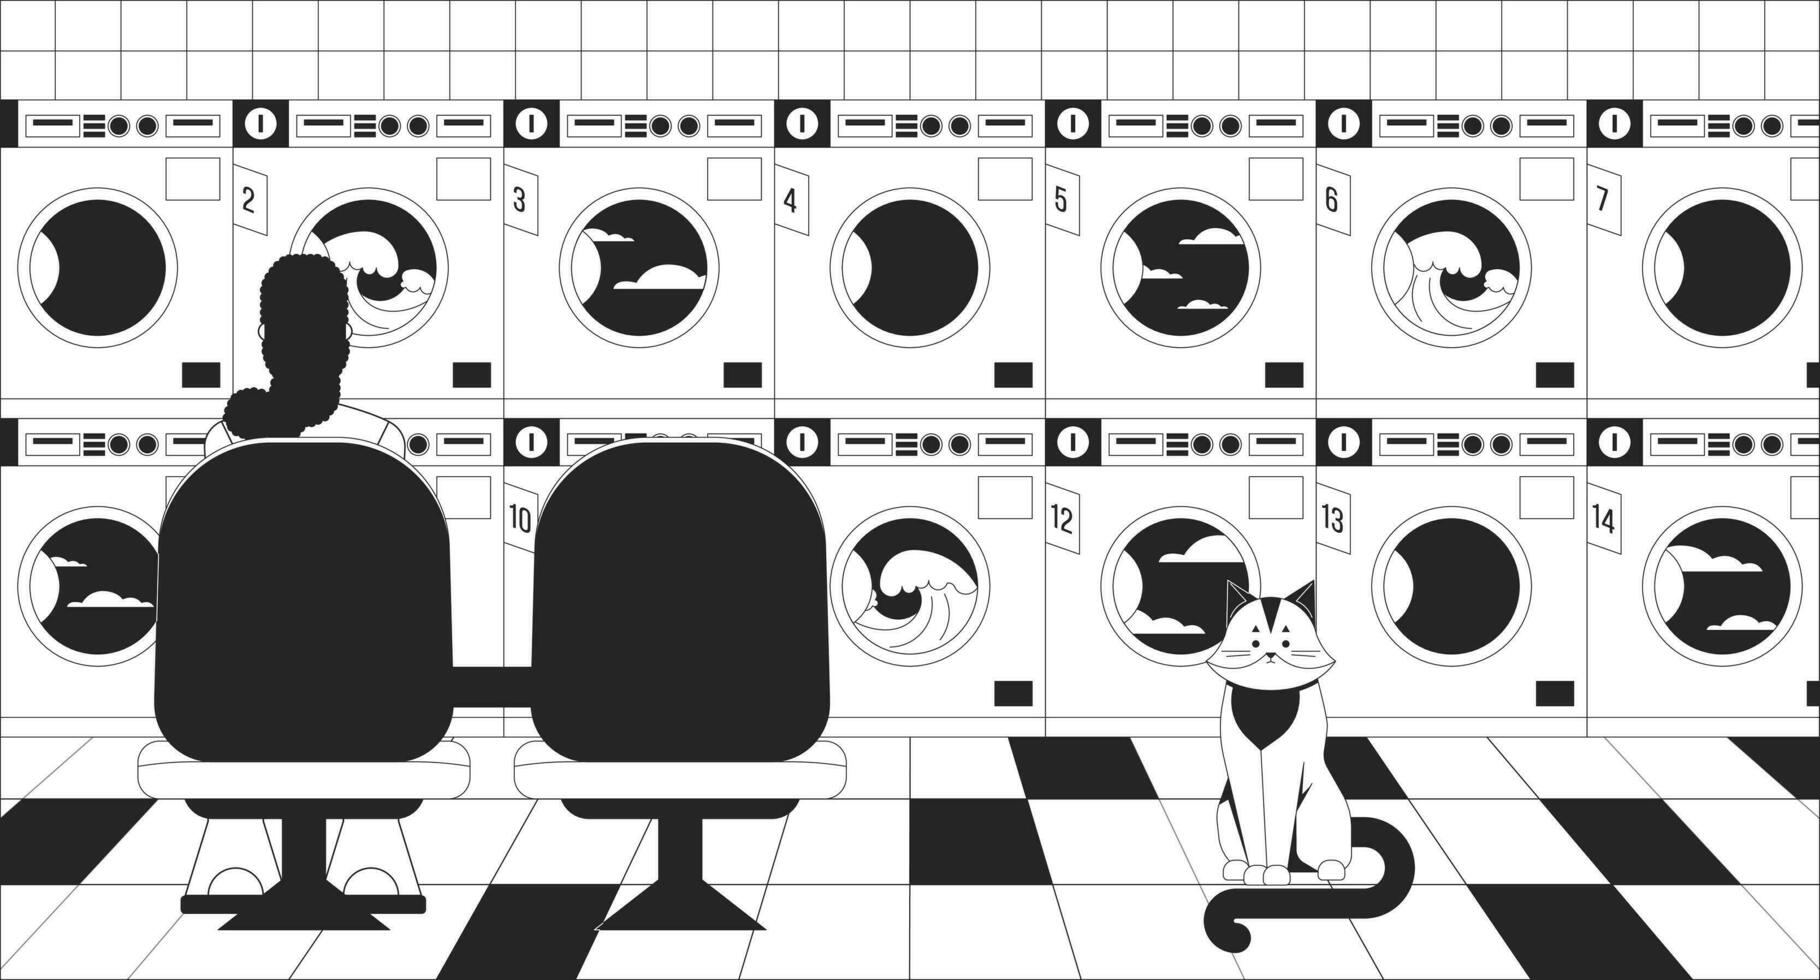 Waiting for laundry black and white lo fi chill wallpaper. Housework laundromat. Woman in launderette 2D vector cartoon character illustration, minimalism background. 80s retro album art, line art